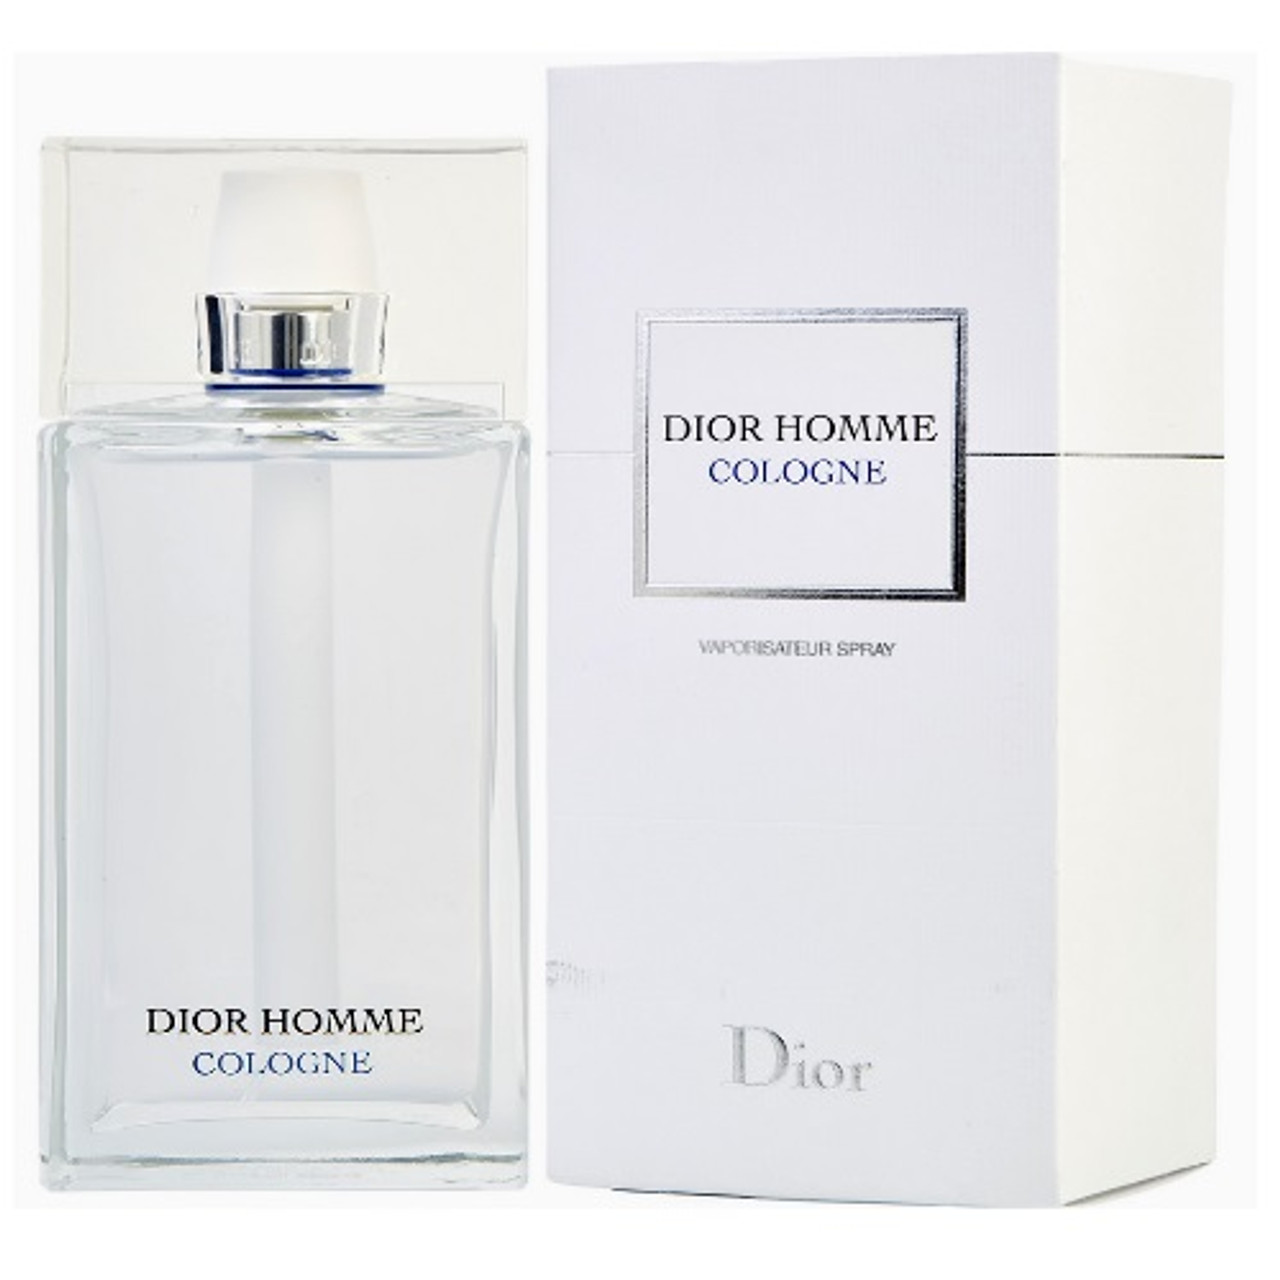 Dior Homme by Christian Dior 6.8 oz EDC for men